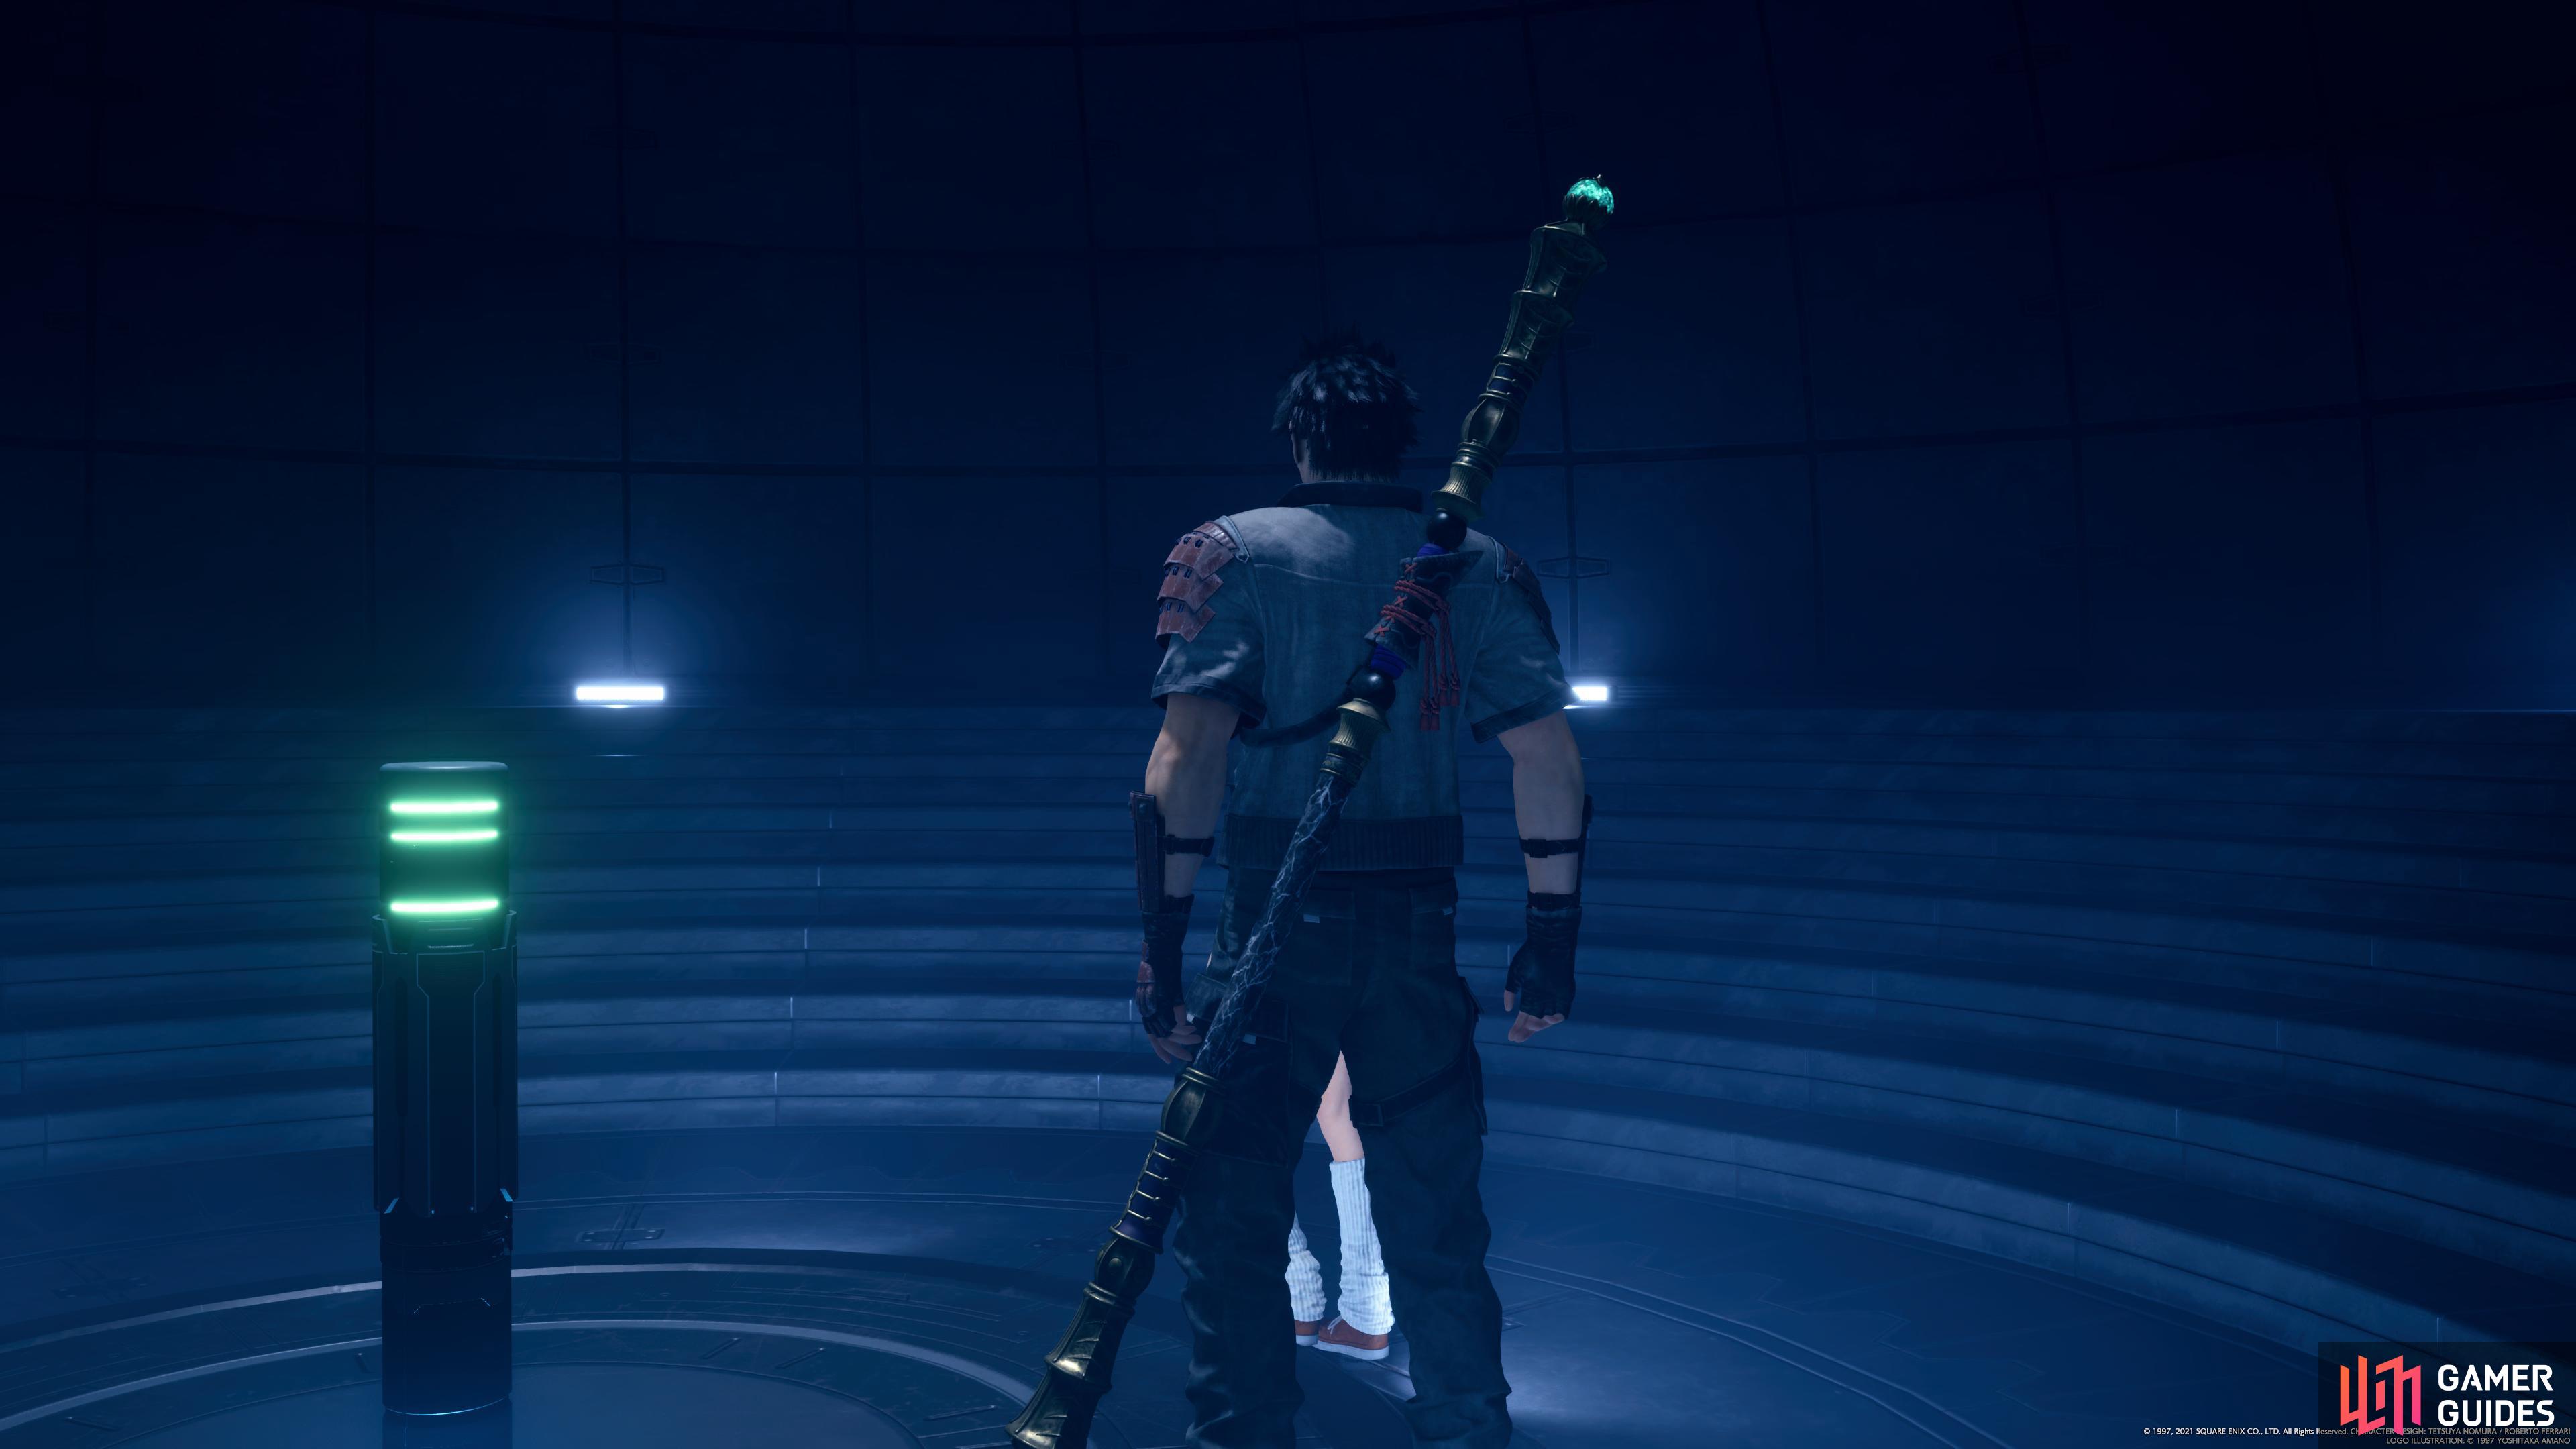 The Djinn Staff is Sonon’s final weapon, focusing on a support role.